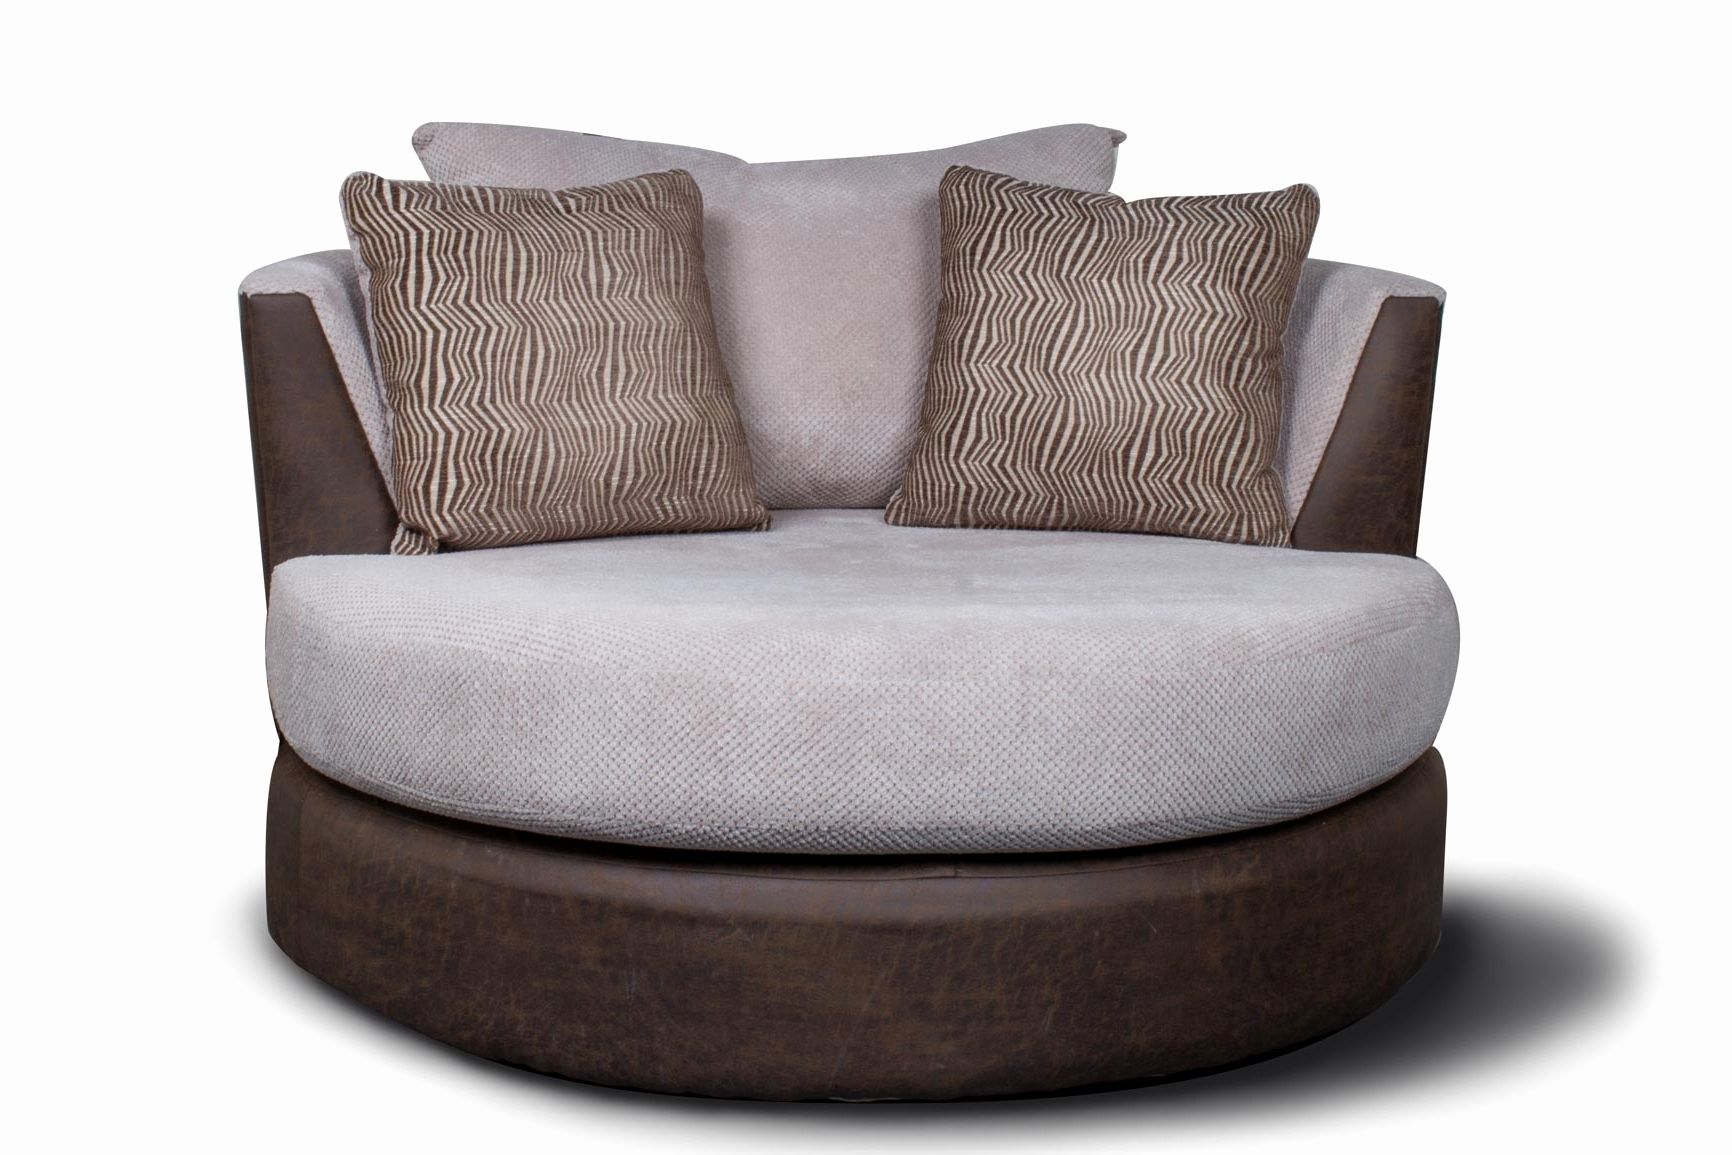 Sofas : Brown Leather Swivel Chair Leather Sofa Large Cuddle Chair Intended For Current Snuggle Sofas (View 12 of 20)